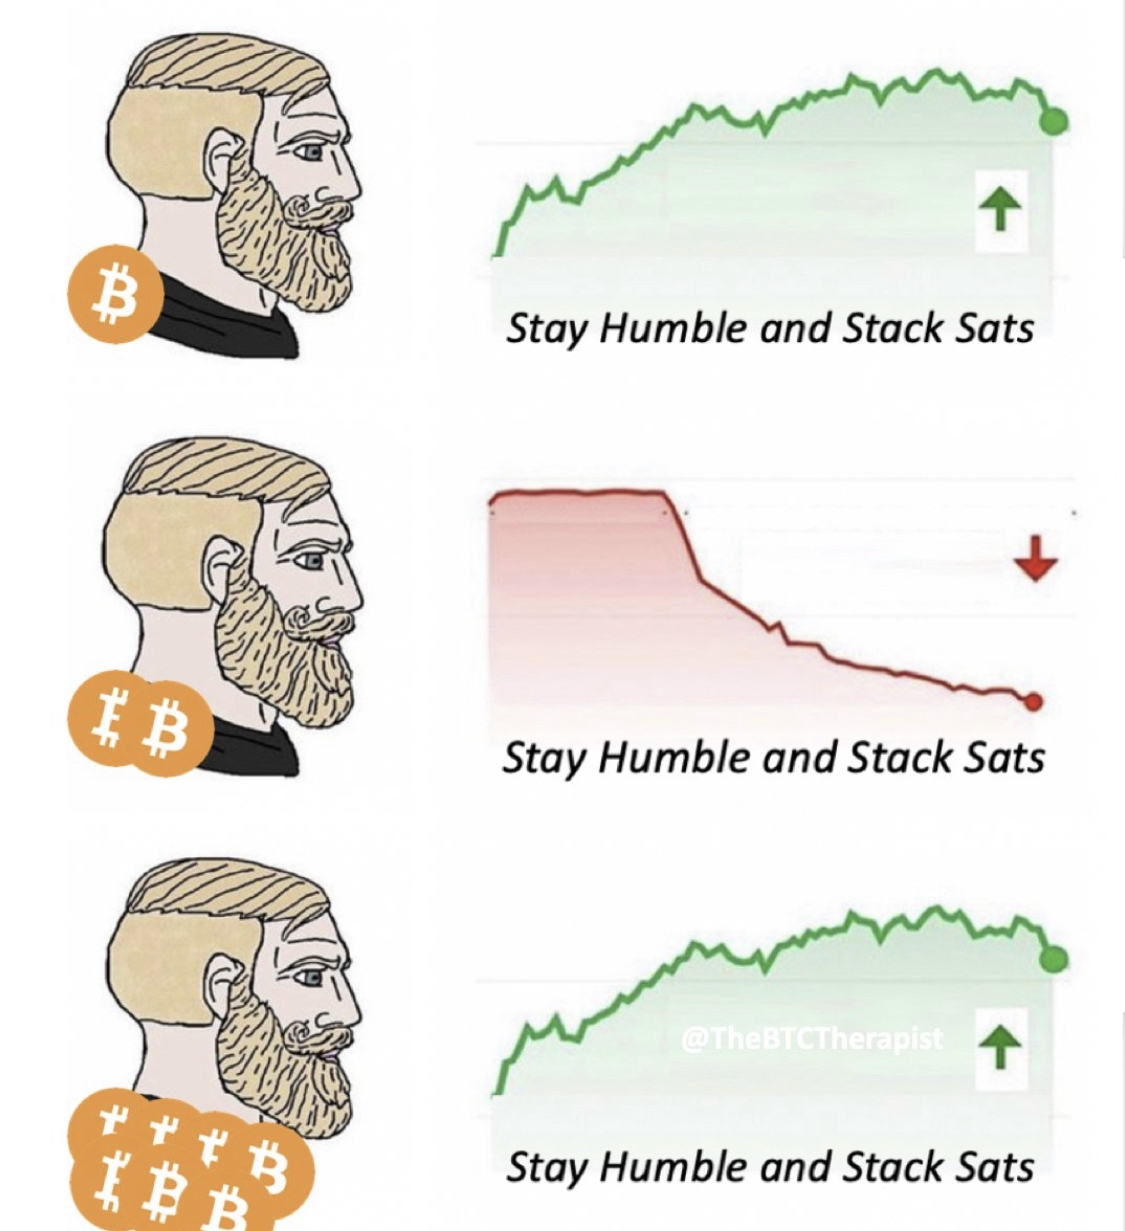 Stay Humble and Stack Sats
\ Stay Humble and Stack Sats
Stay Humble and Stack Sat